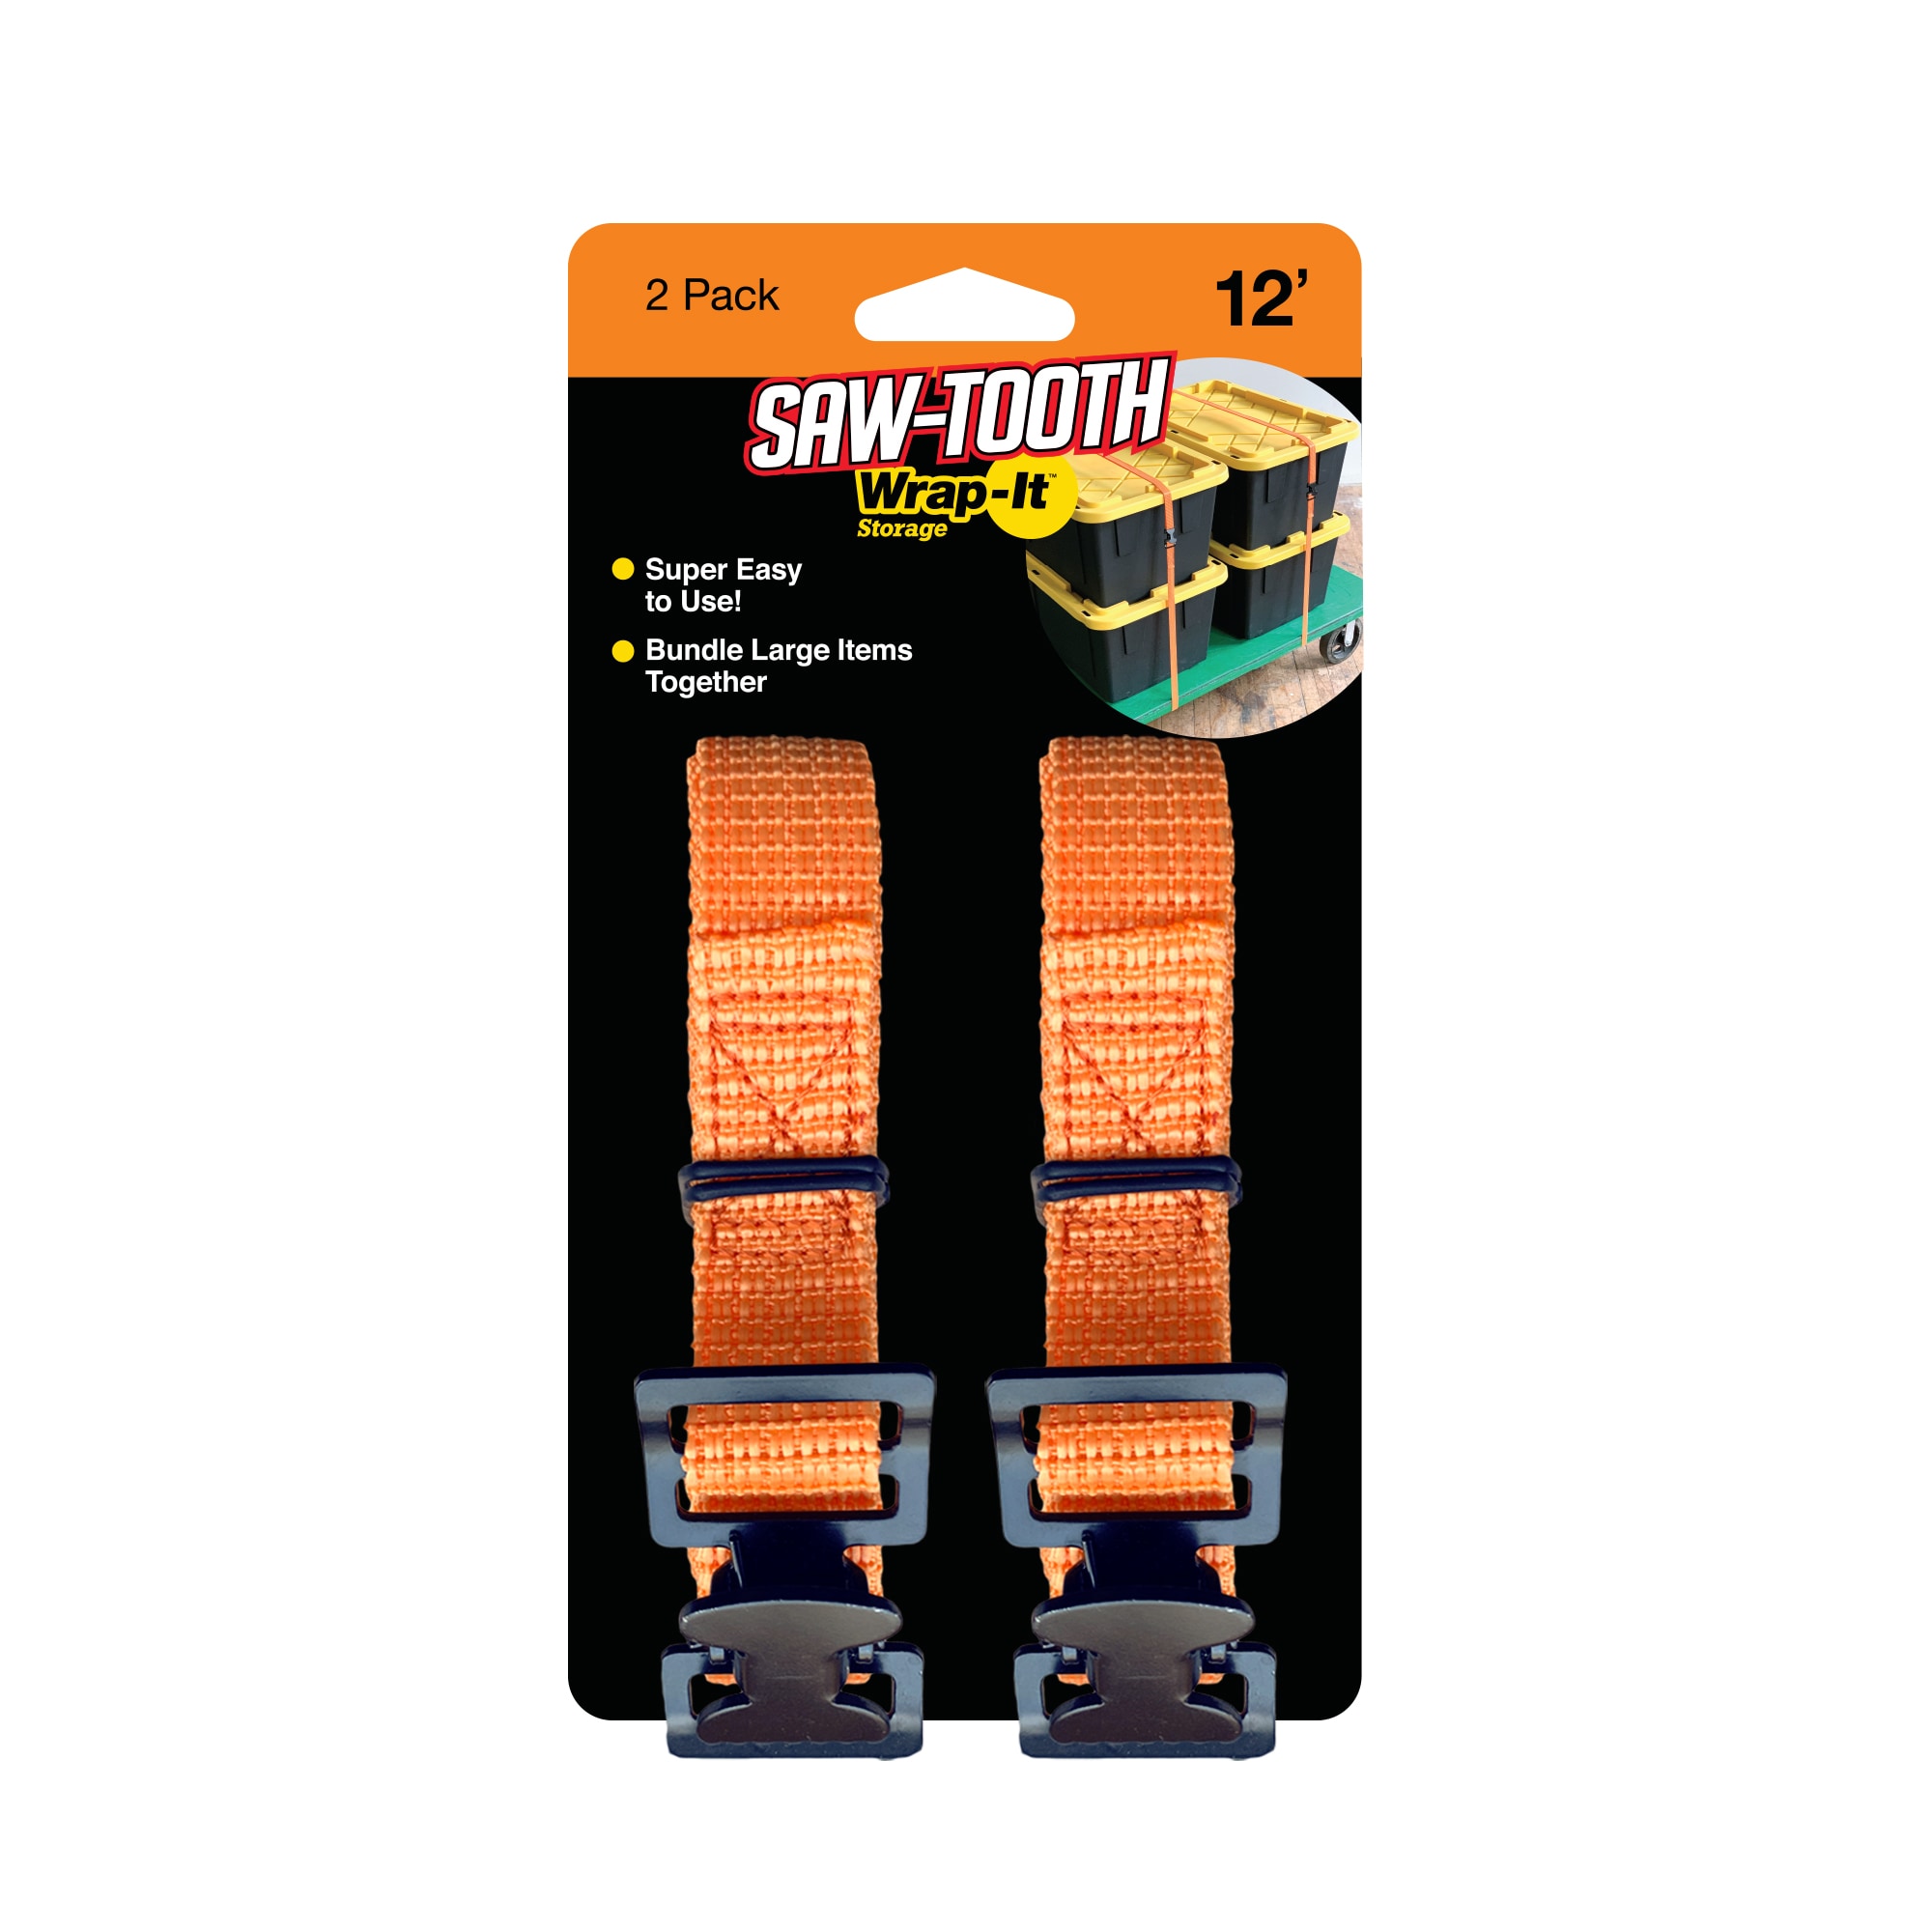 Strap Extender: Add inches to Hook & Loop Wraps or Belts